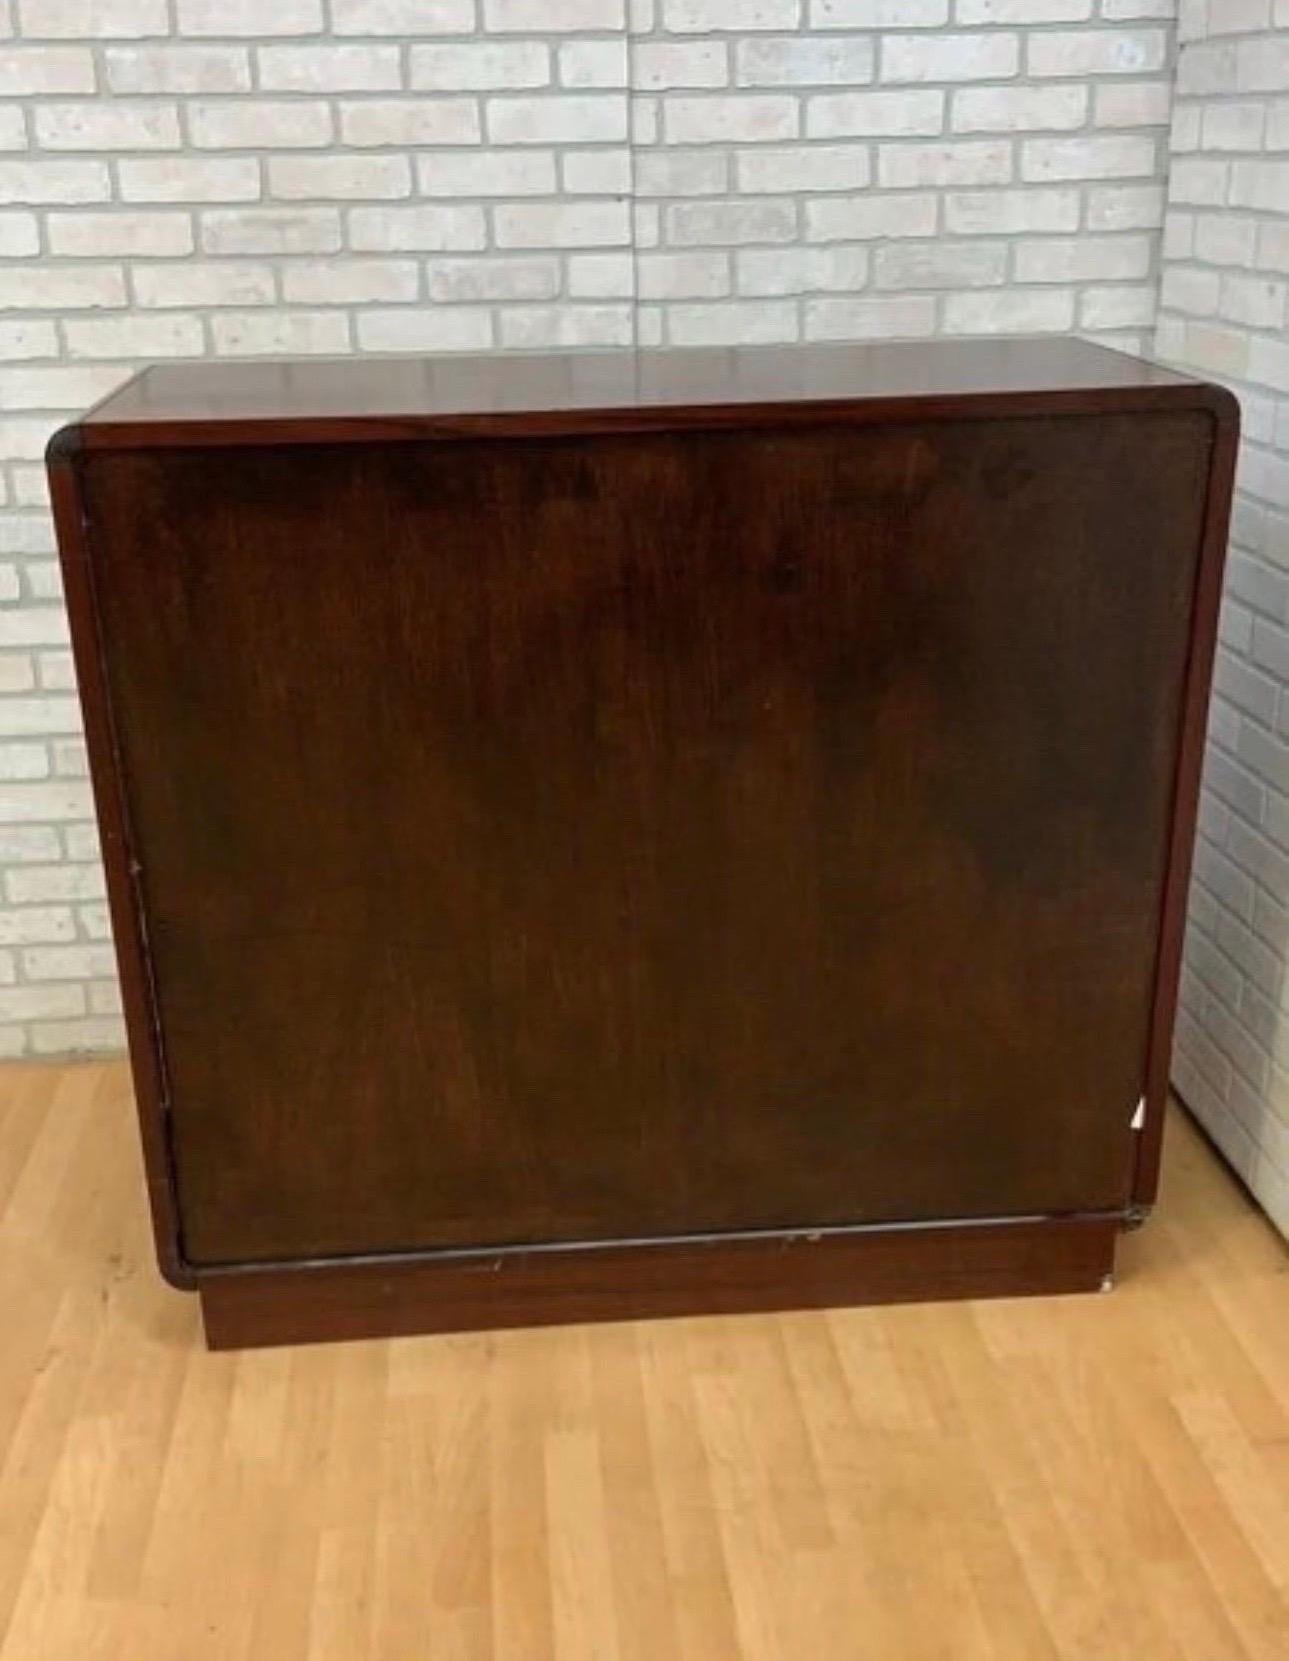 Mid-Century Modern Danish Rosewood Gentleman's Cabinet/Armoire

Gorgeous Mid-Century Modern Danish Rosewood Side By Side Dressing Cabinet/Armoire. This Chest is Beautifully Crafted in a Gorgeous Finished Rosewood and Features 5 Storage Drawers and